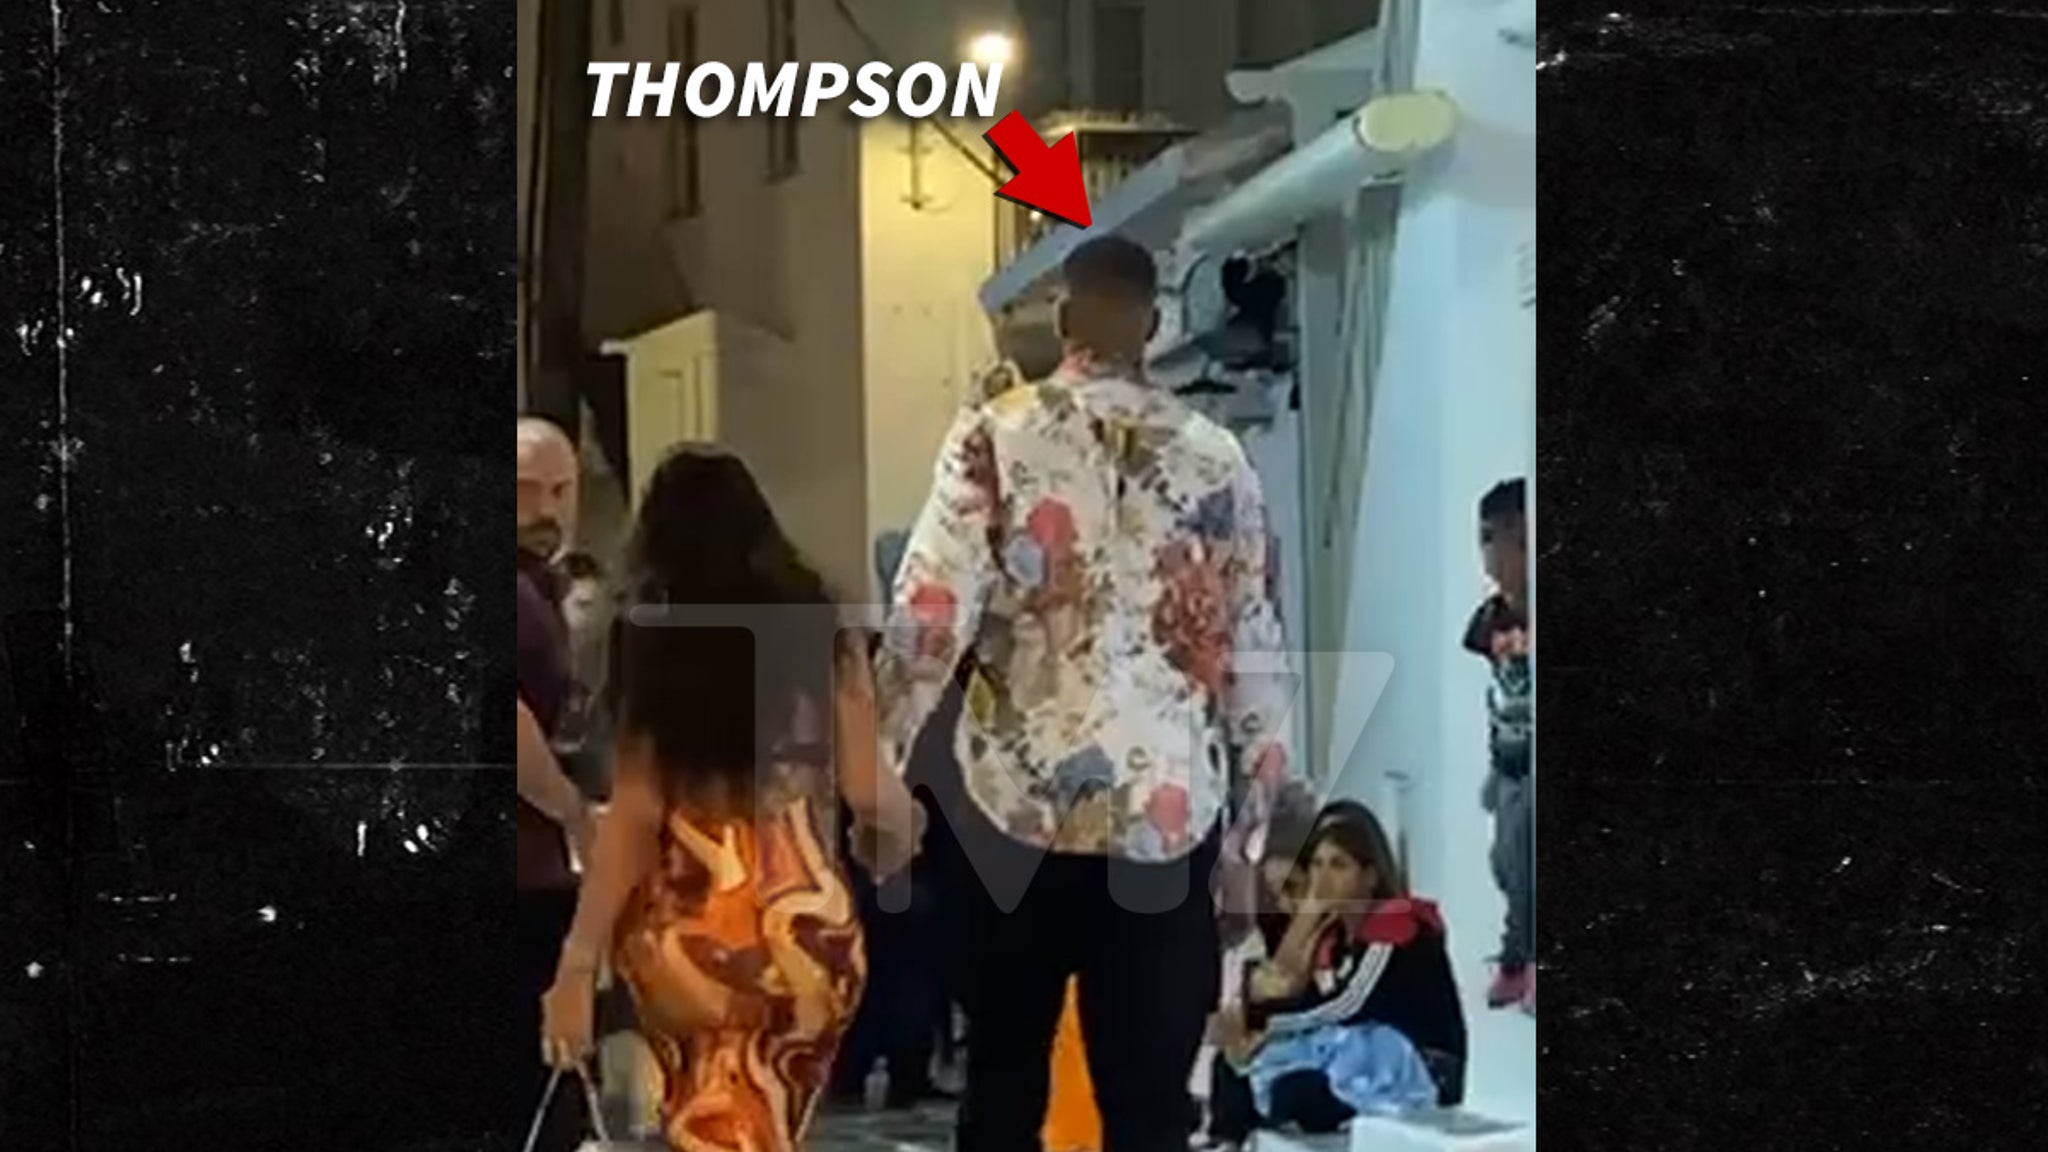 Tristan Thompson Holding Hands with Mystery Woman After Clubbing in Greece – TMZ